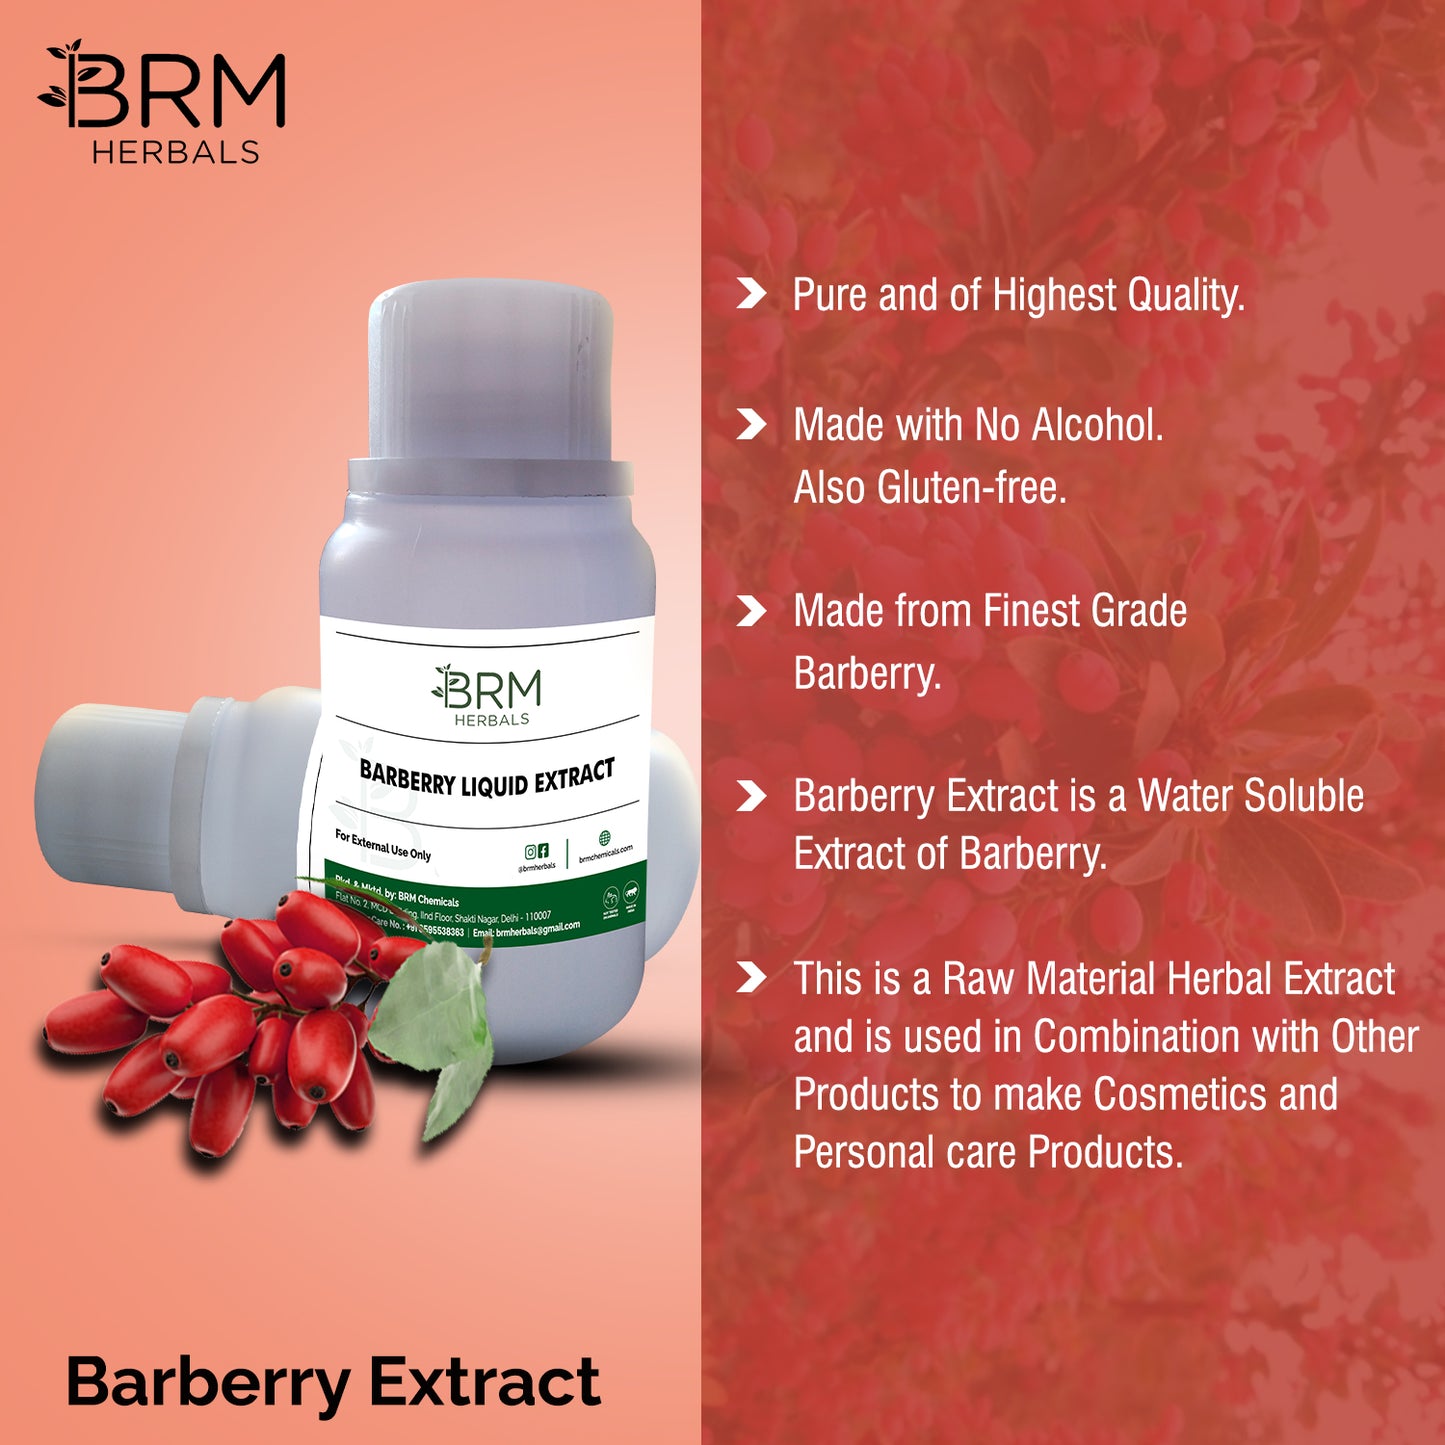 Barberry Liquid Extract Water Soluble